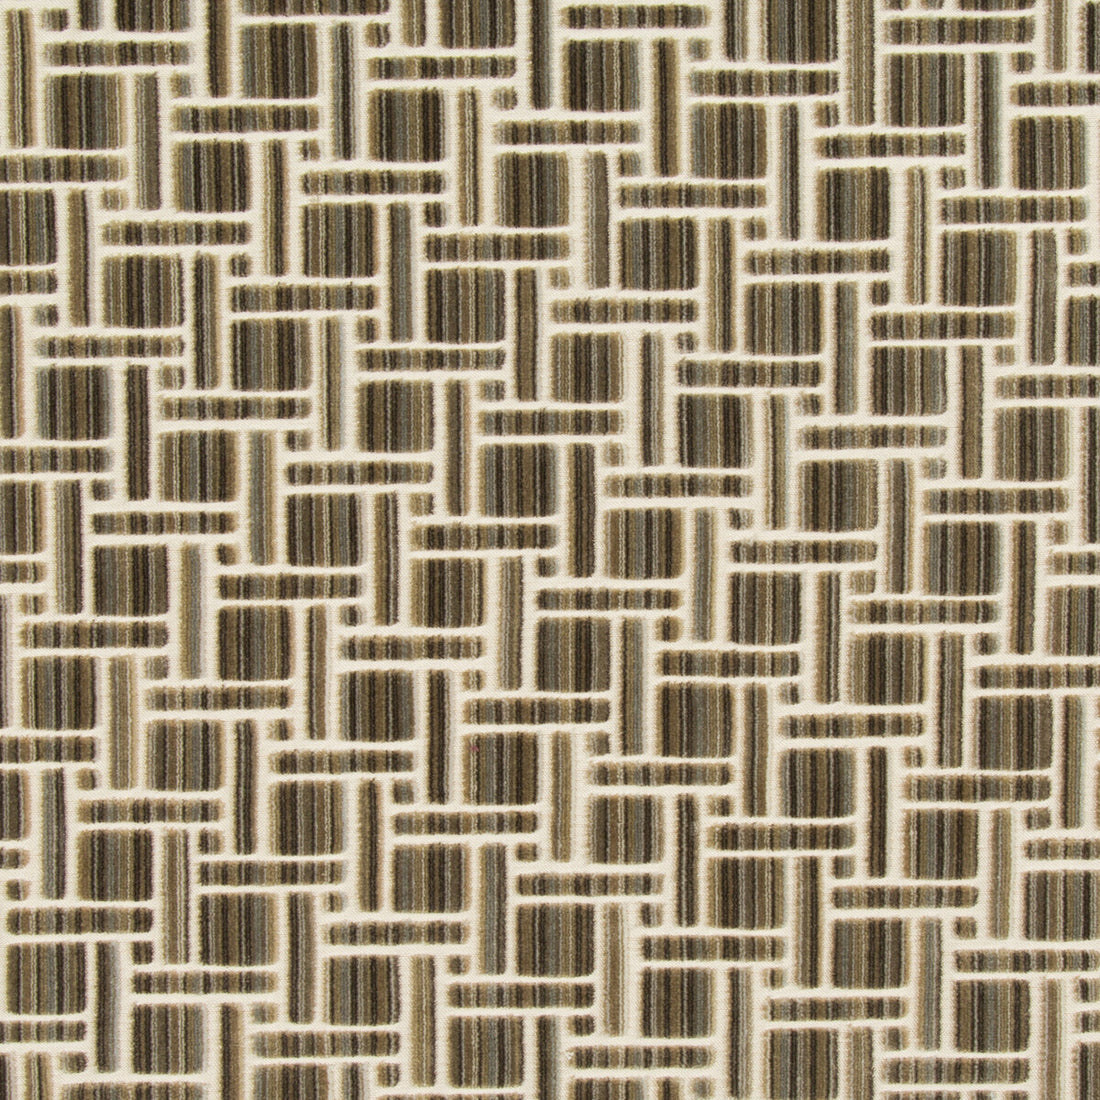 Inside Tracks fabric in sandstone color - pattern 34792.16.0 - by Kravet Couture in the Artisan Velvets collection